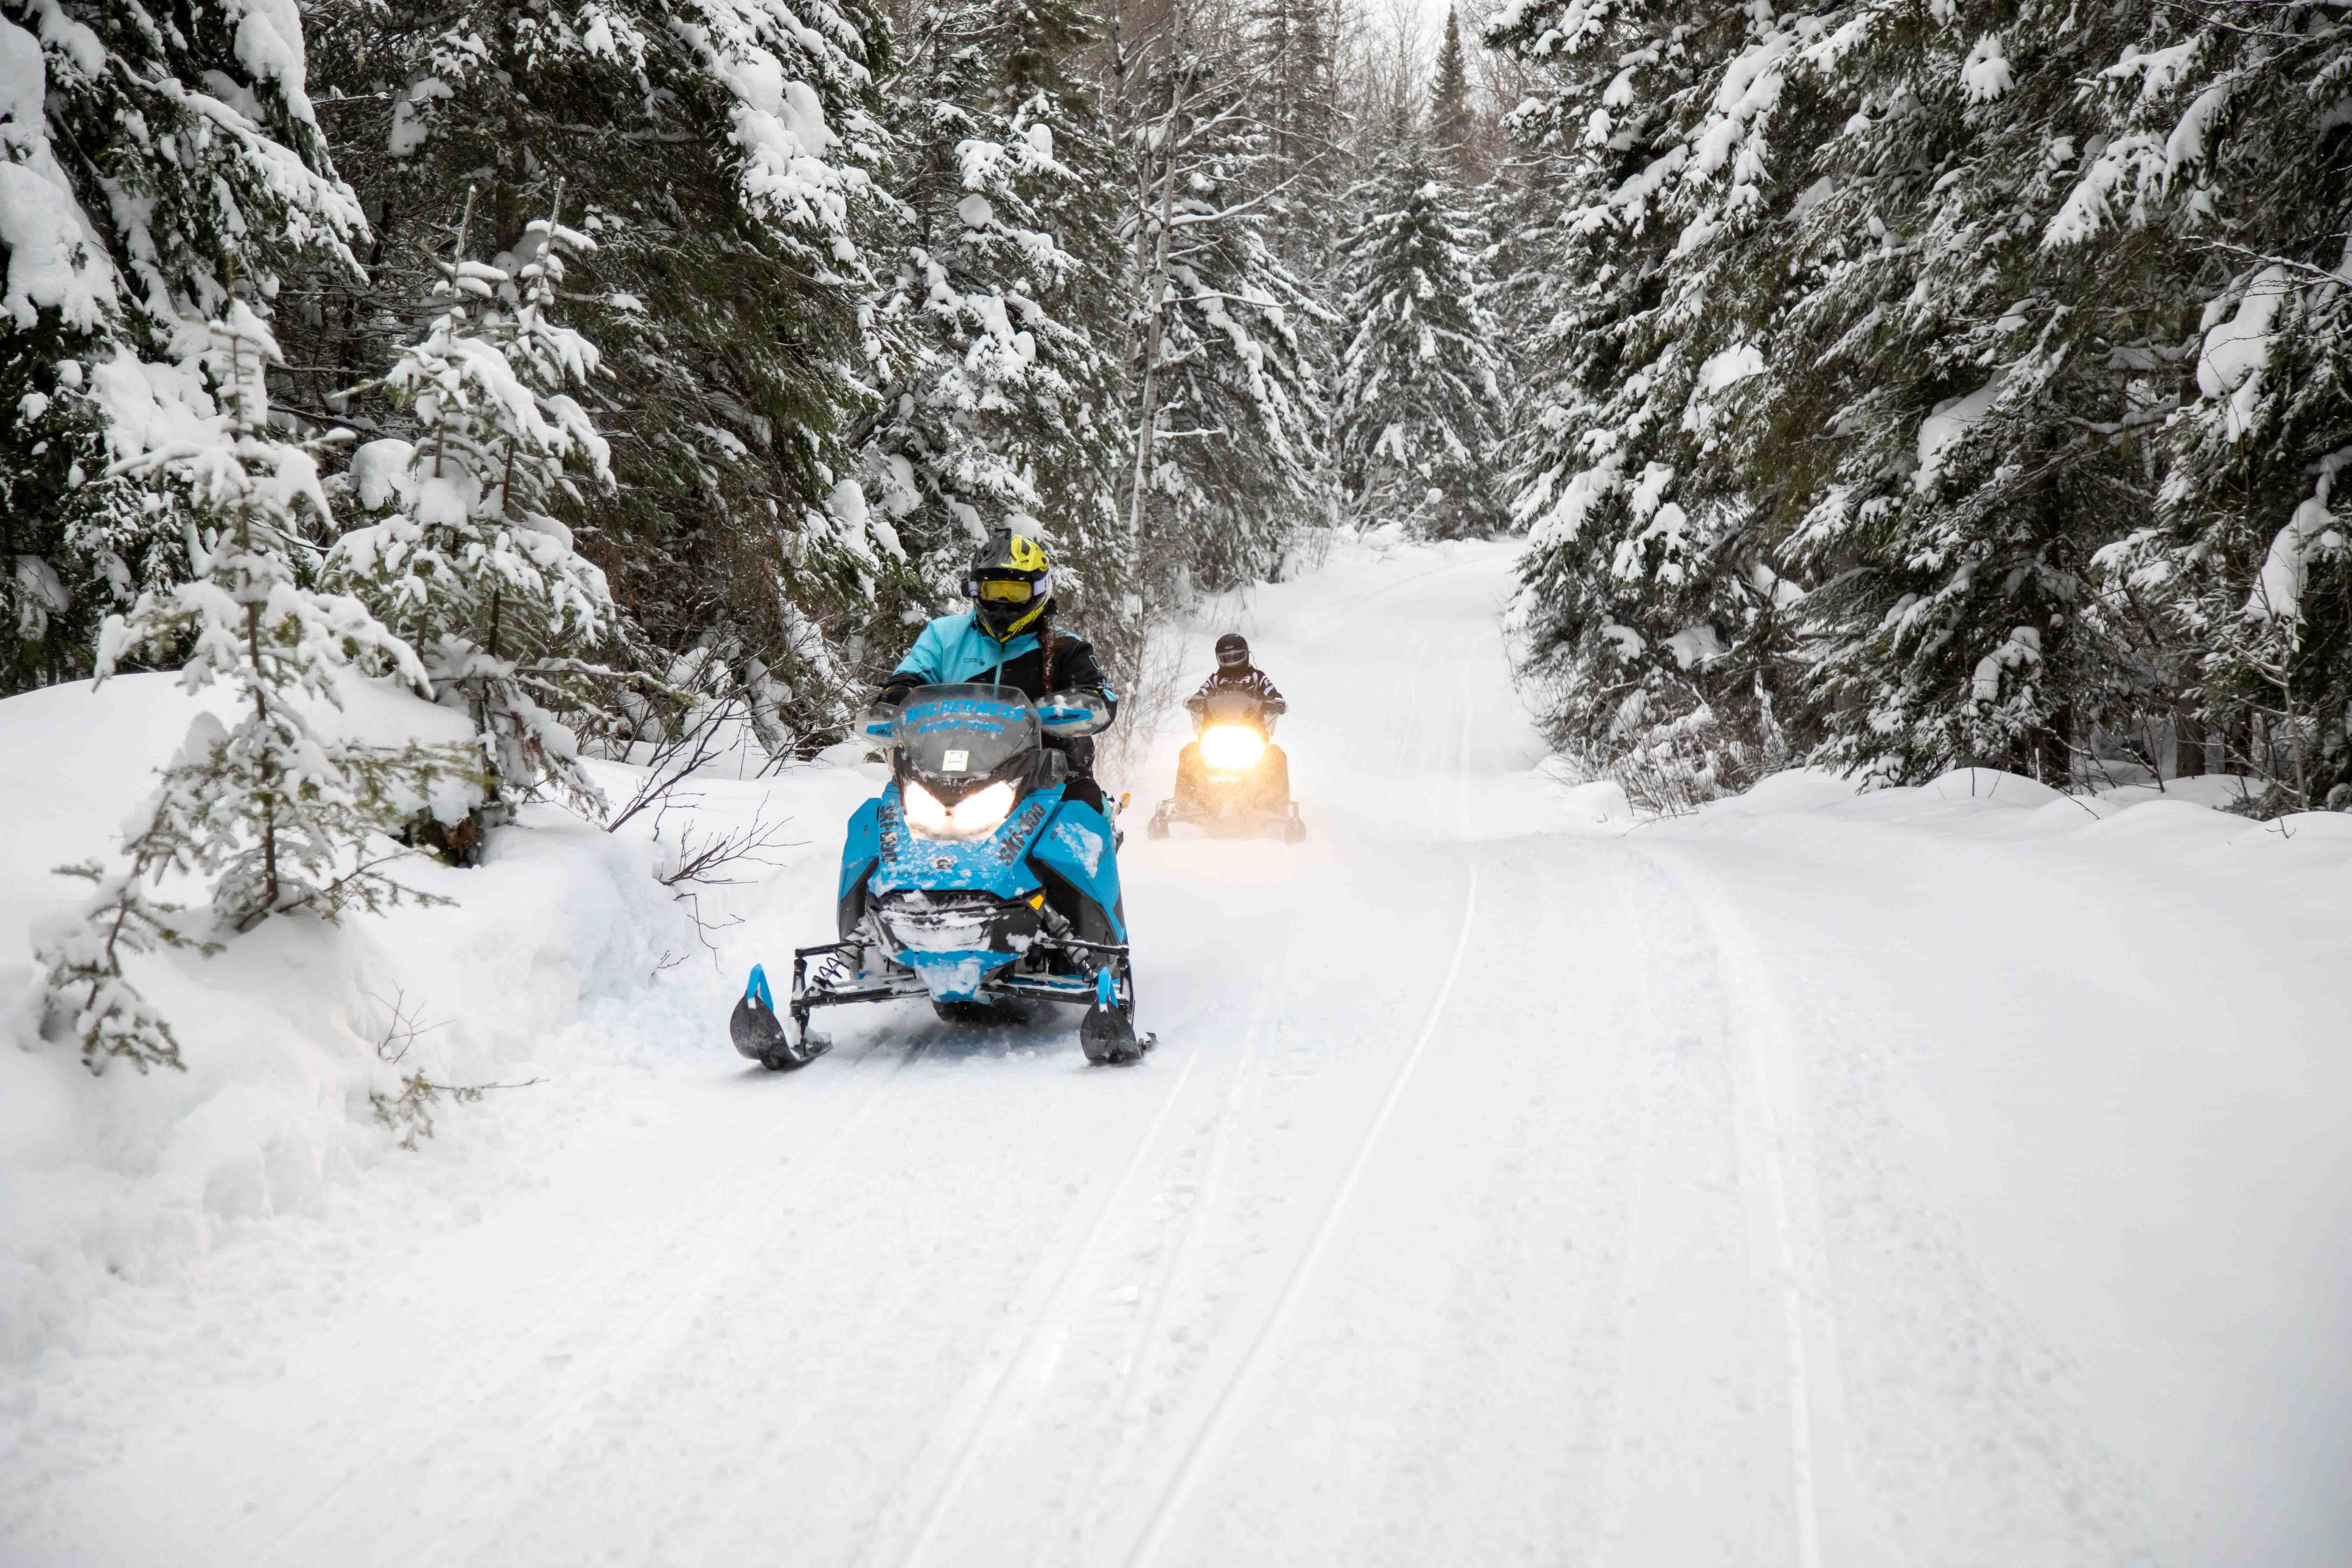 2 people on snomobiles ride a snowy trail through dense forest